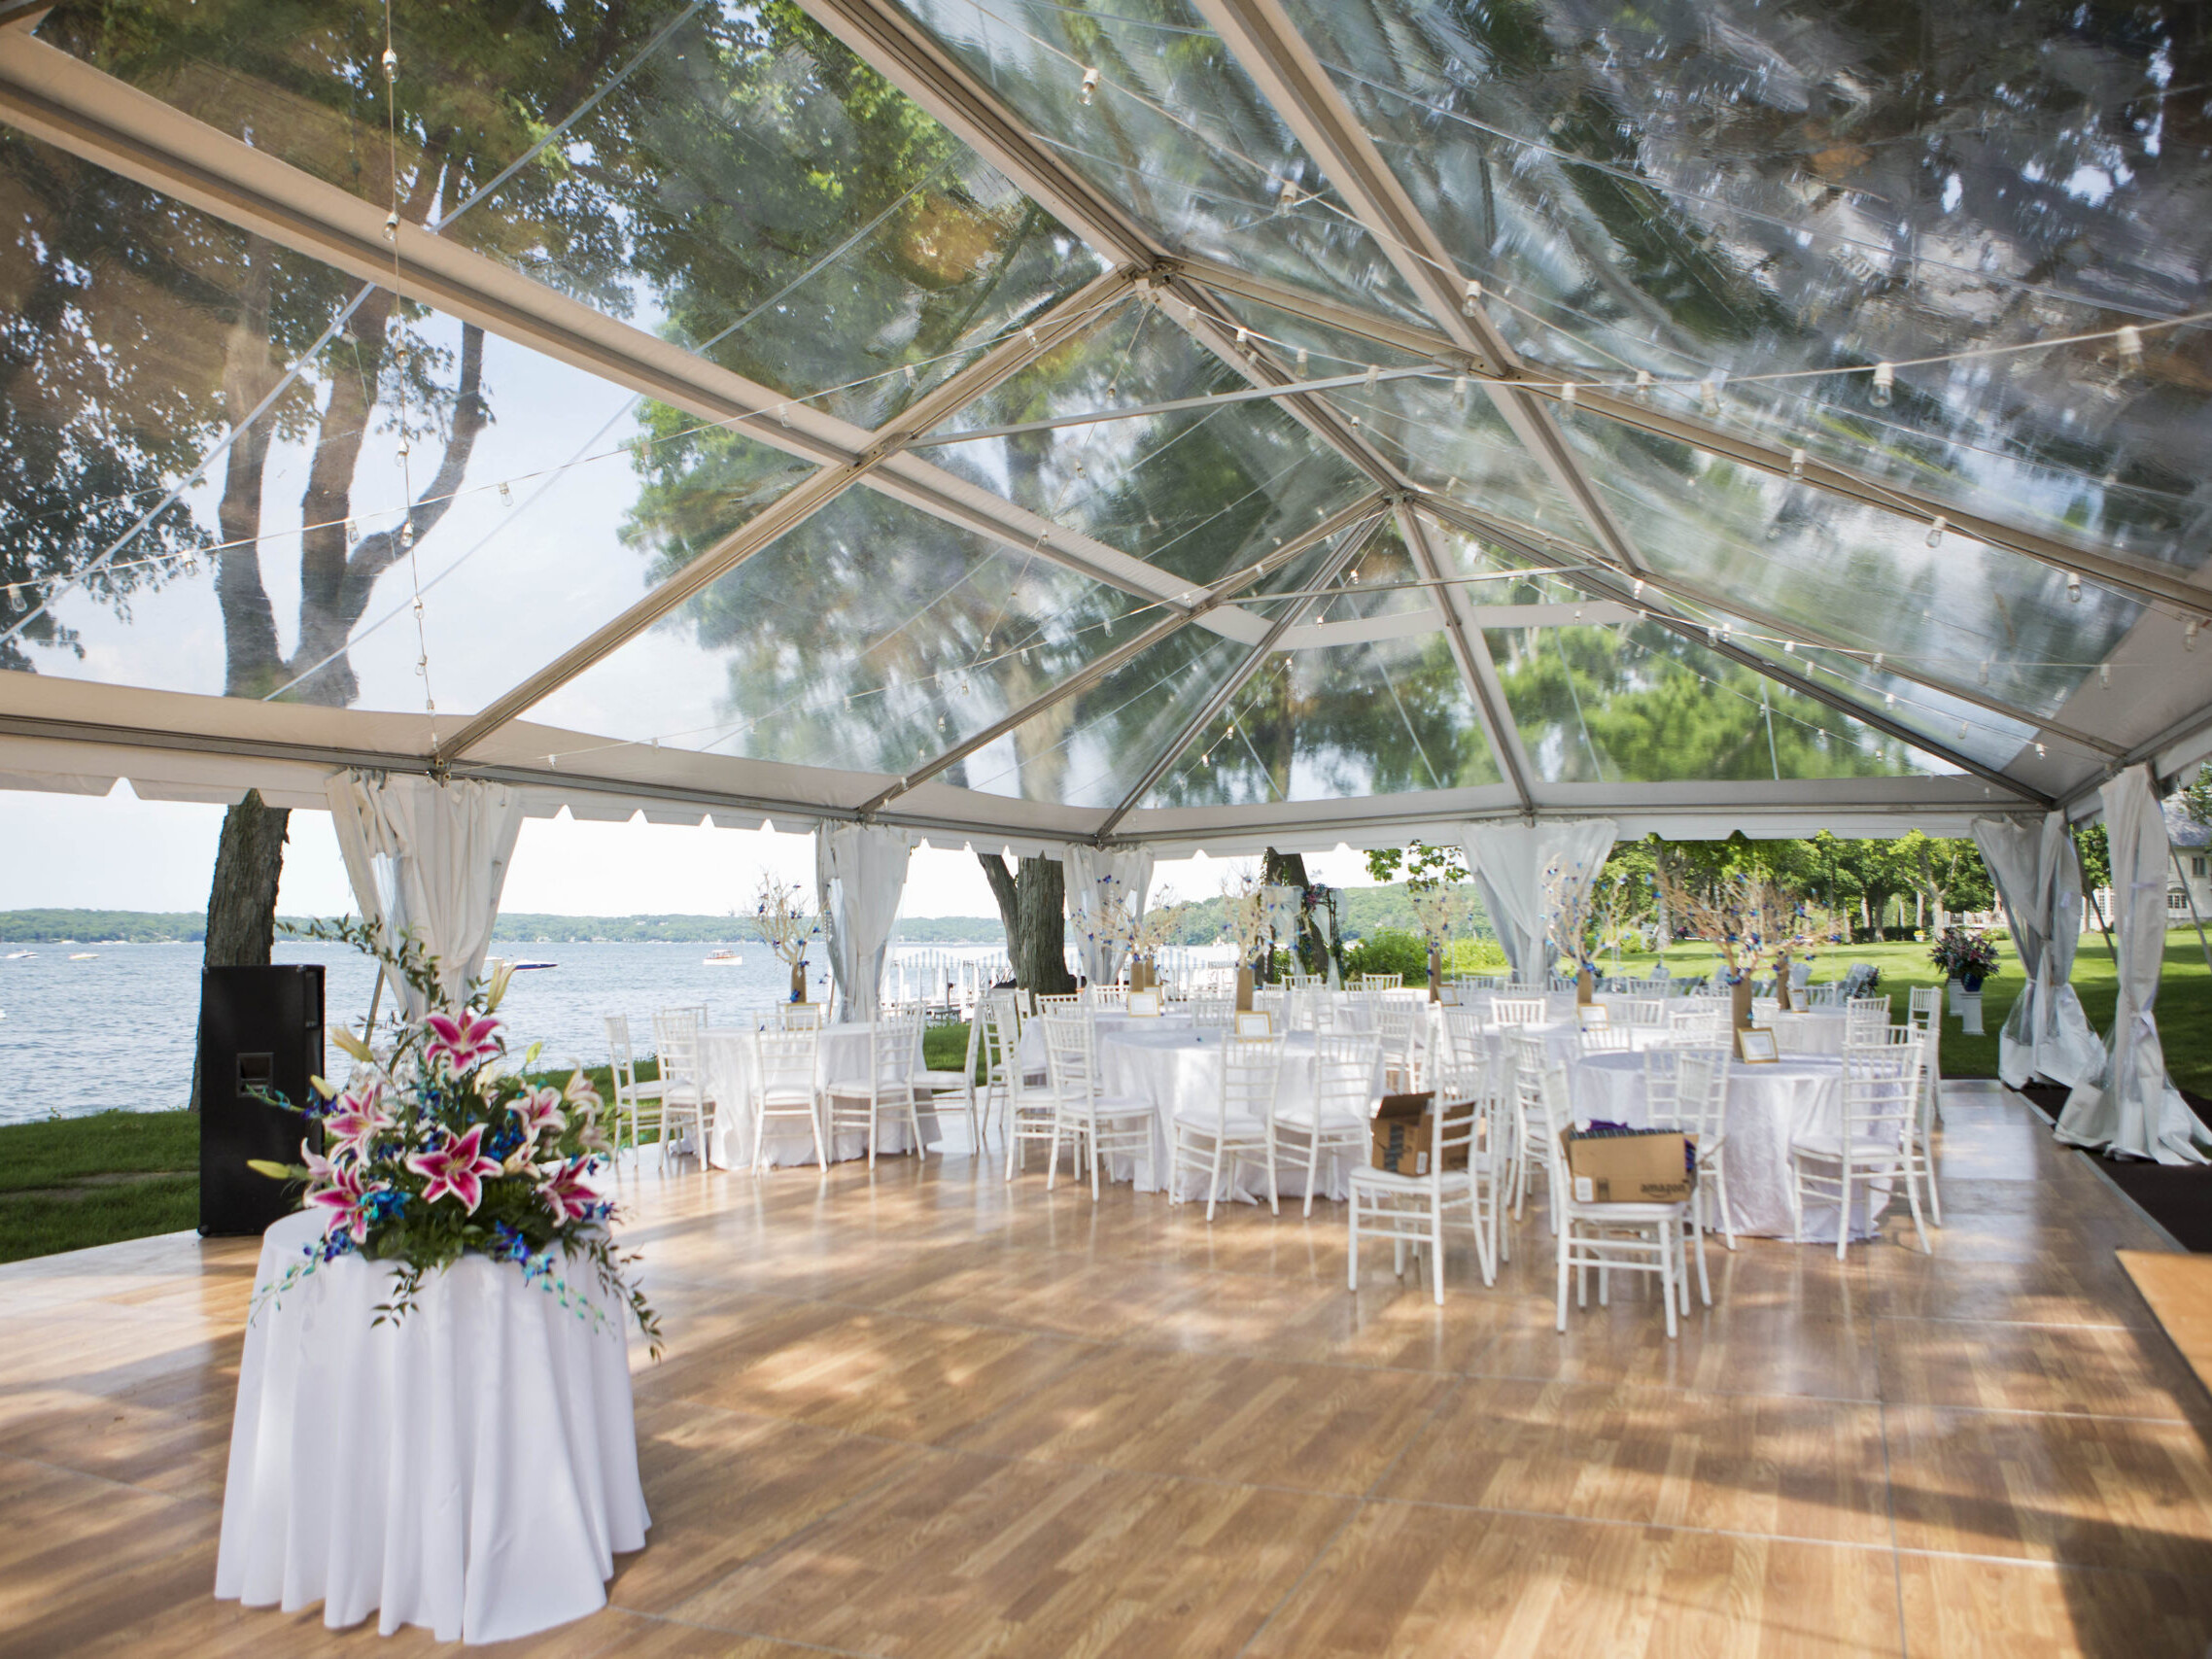 Inside a clear top tent on a hard wooden floor with tables and chairs set up outside on grass on a sunny day next to a lake for a wedding event.